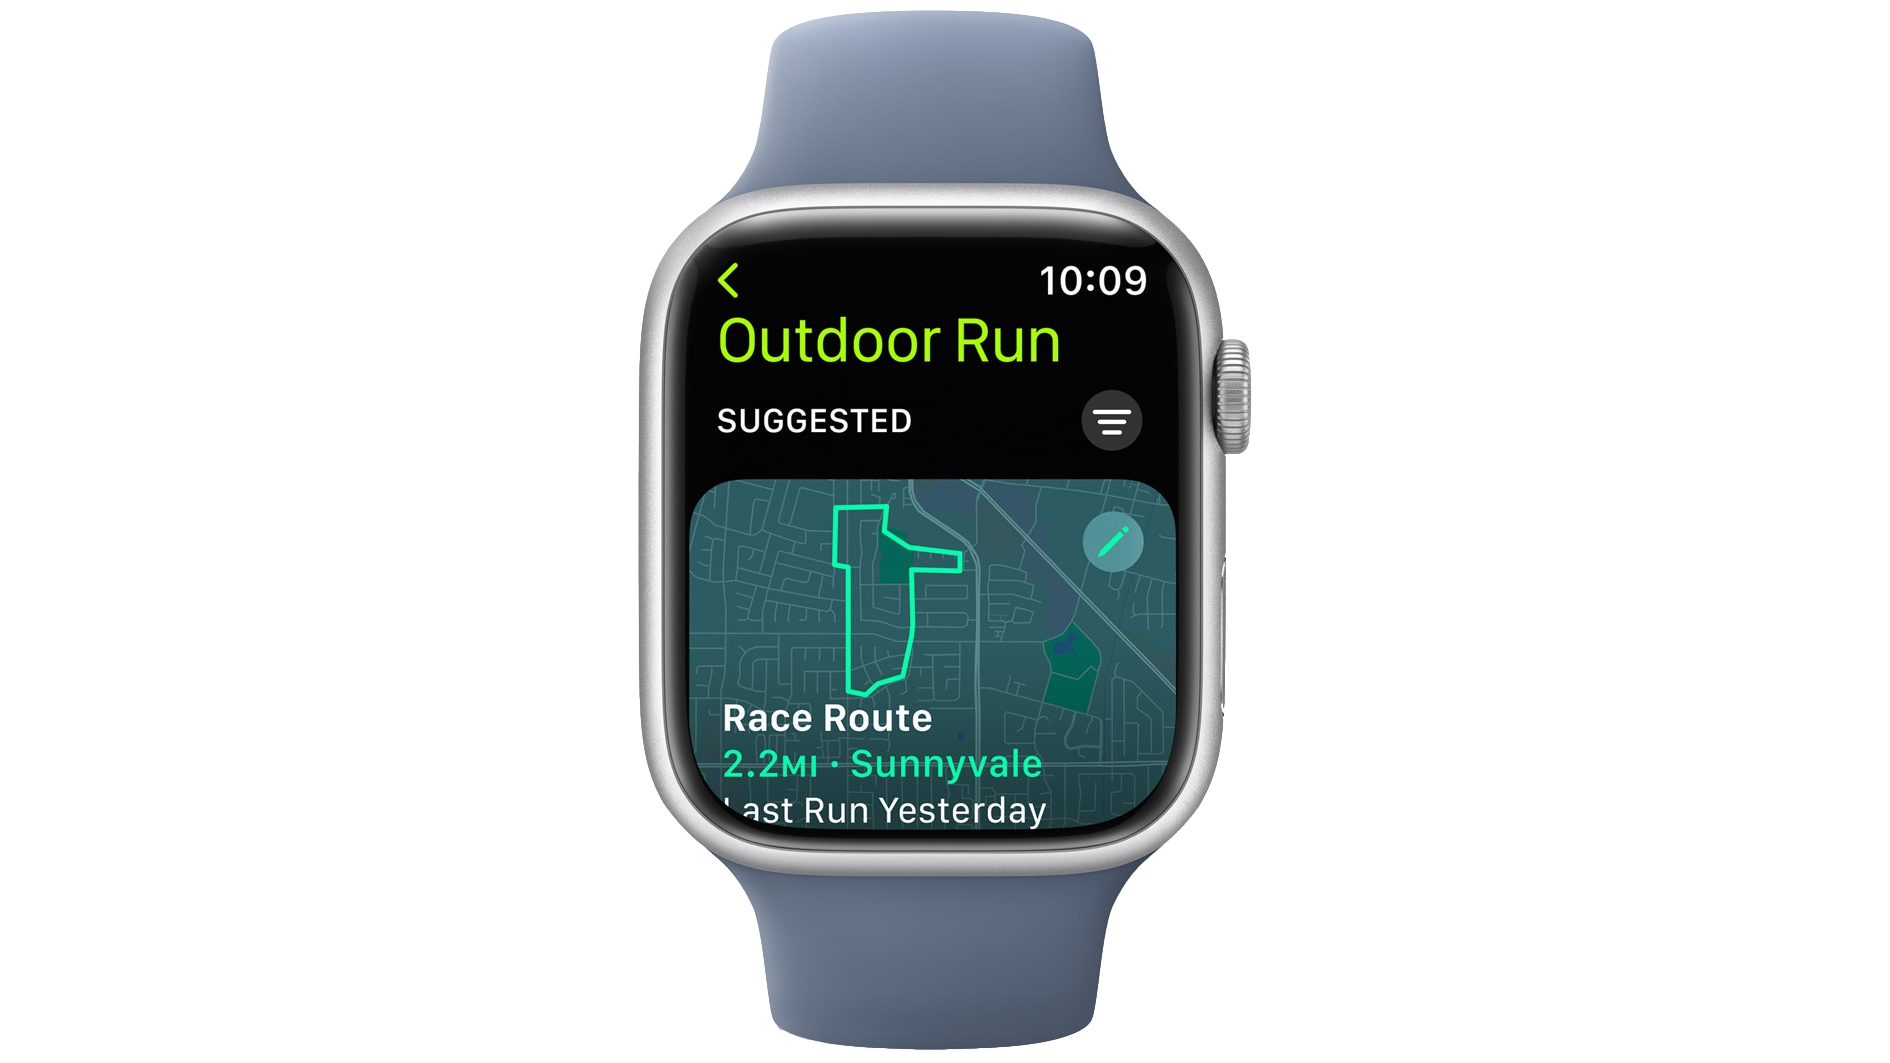 watchOS 9.2 brings the new Race Route and Automatic Track Detection features